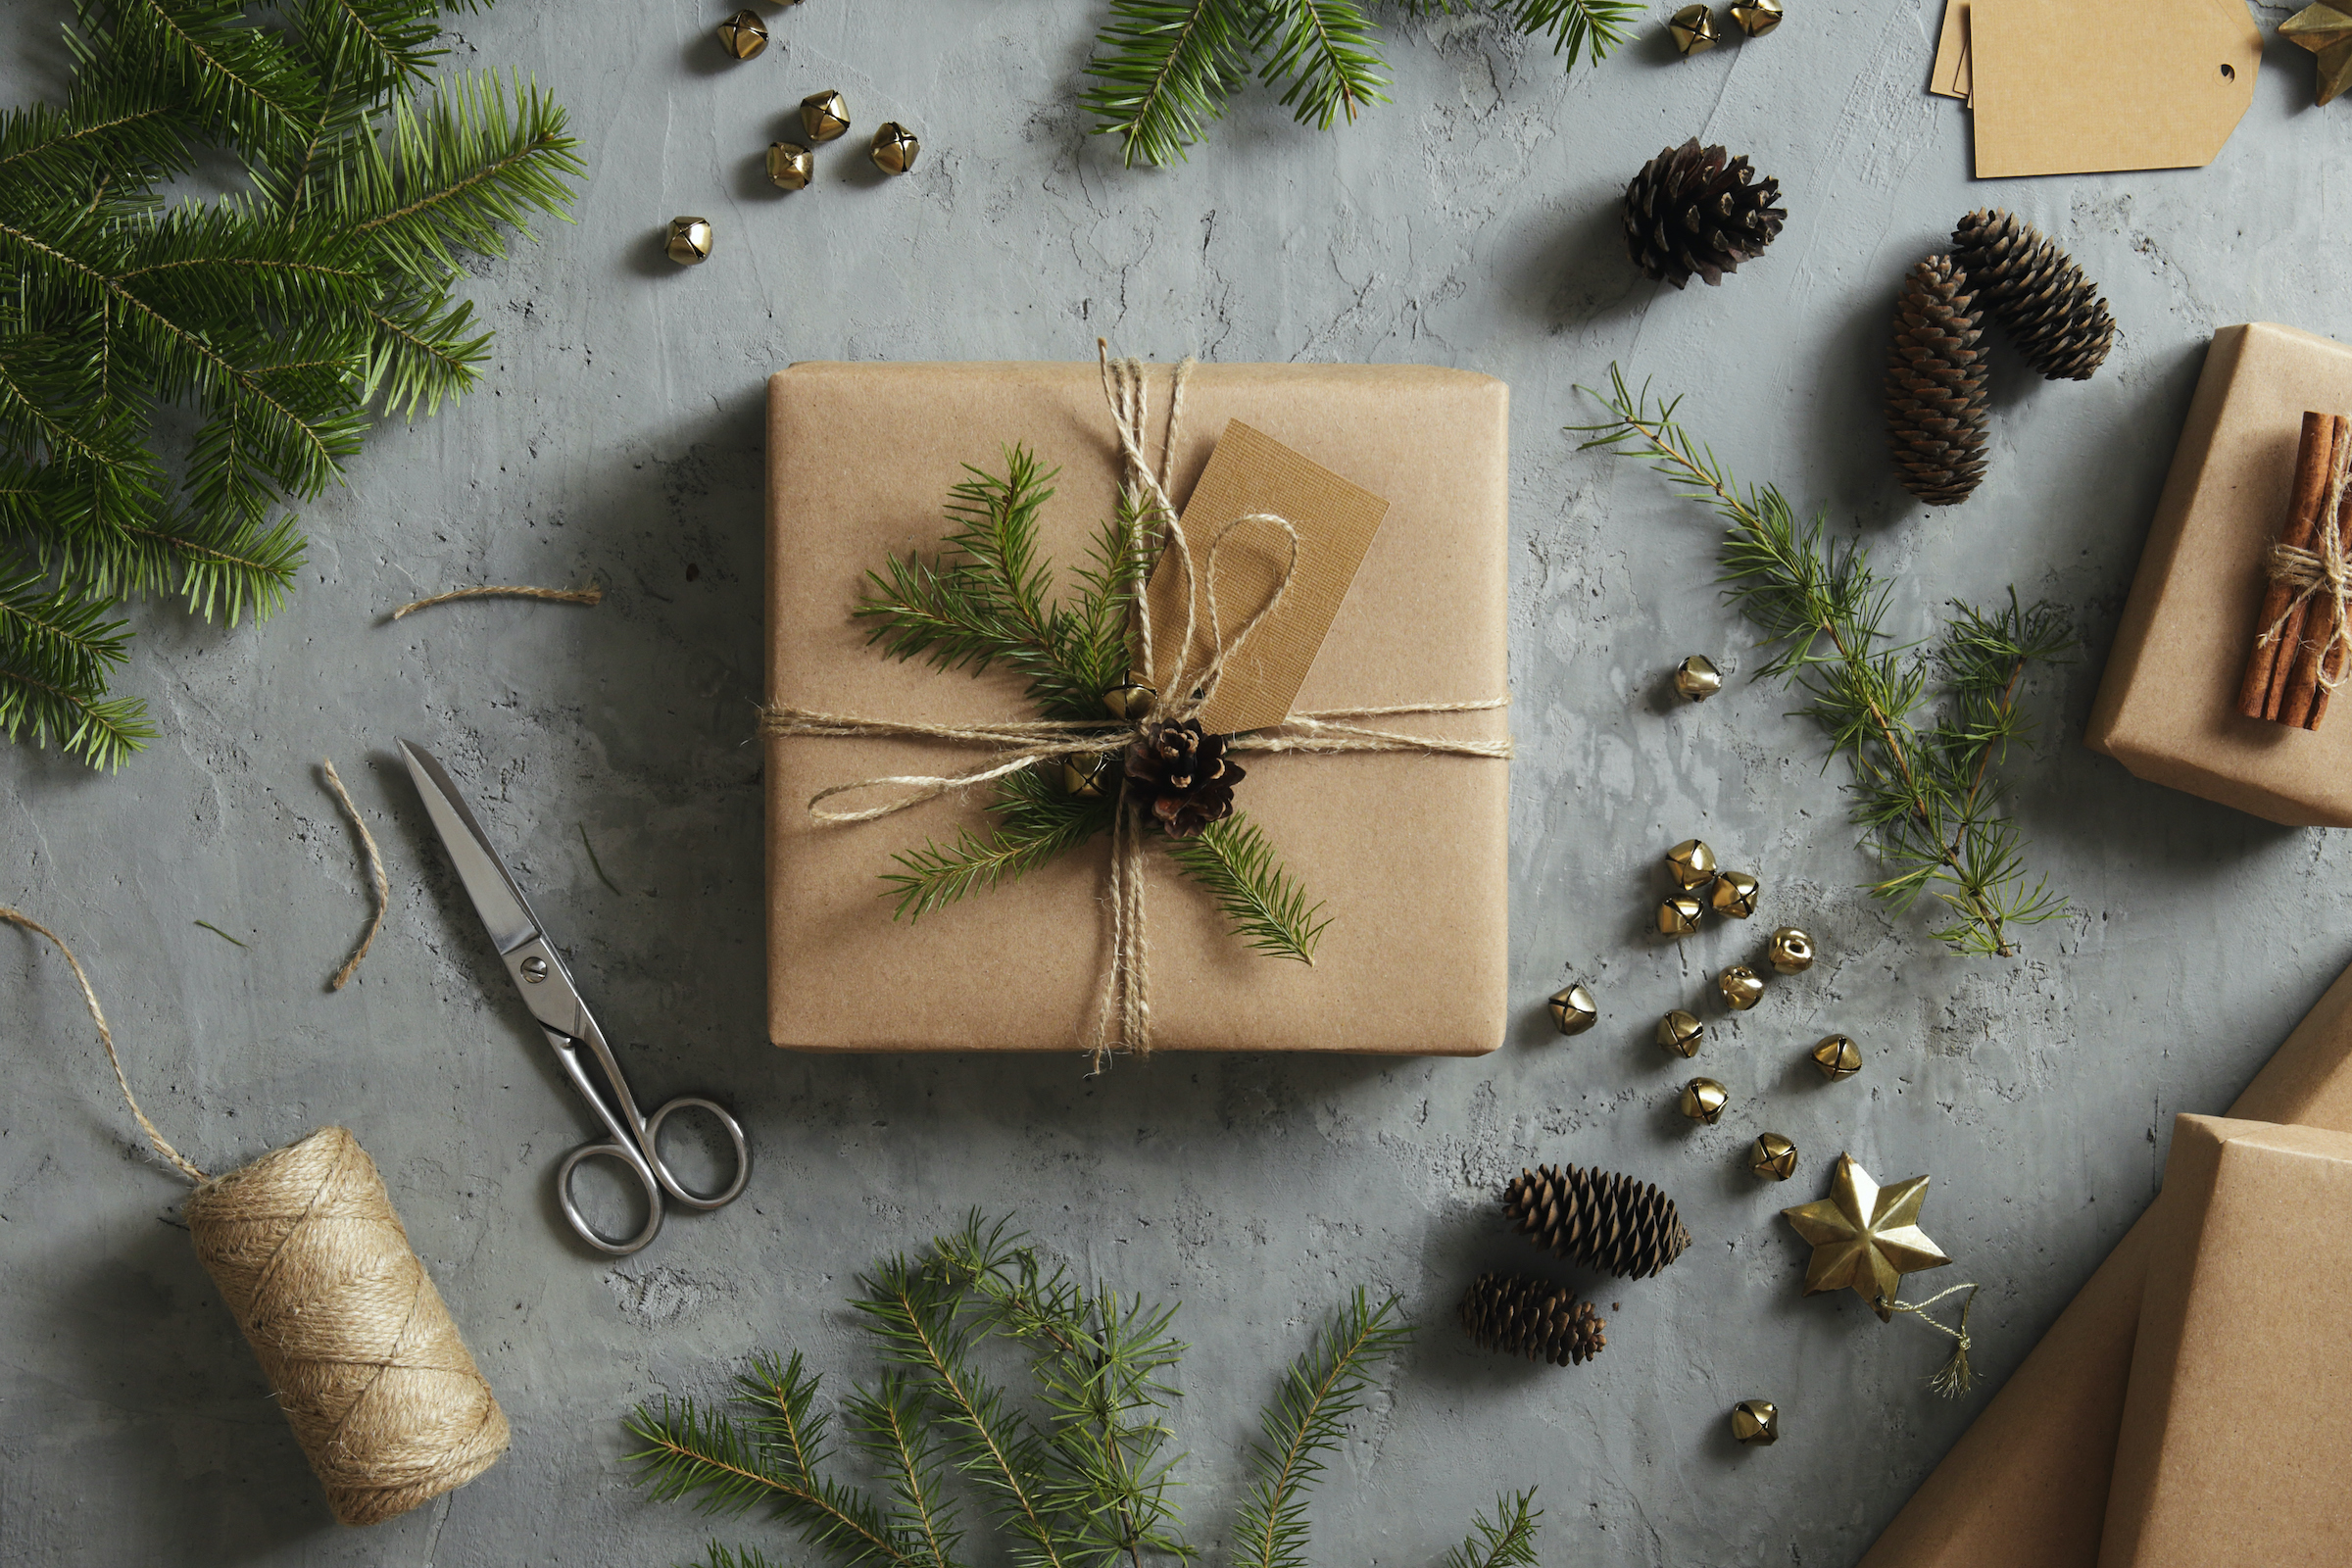 Last Minute Gift Ideas for People With Arthritis